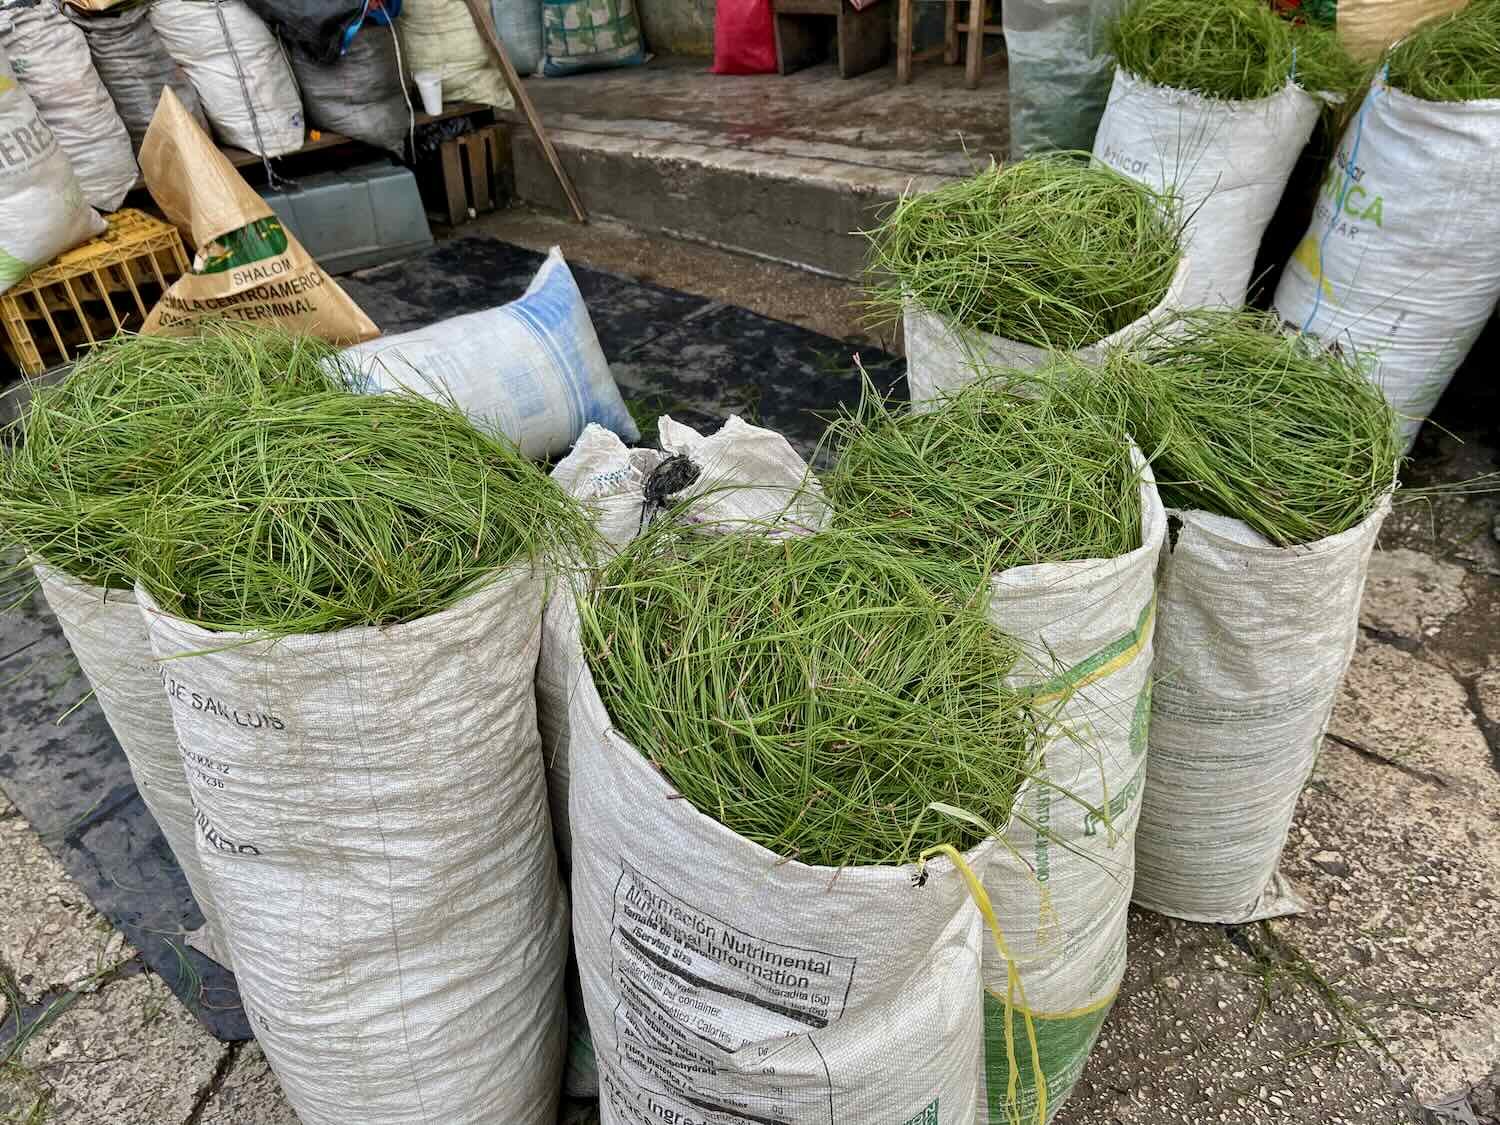 Pine needles have many uses ranging from basket weaving, to a naturally-scented floor covering, and even some folk medicines